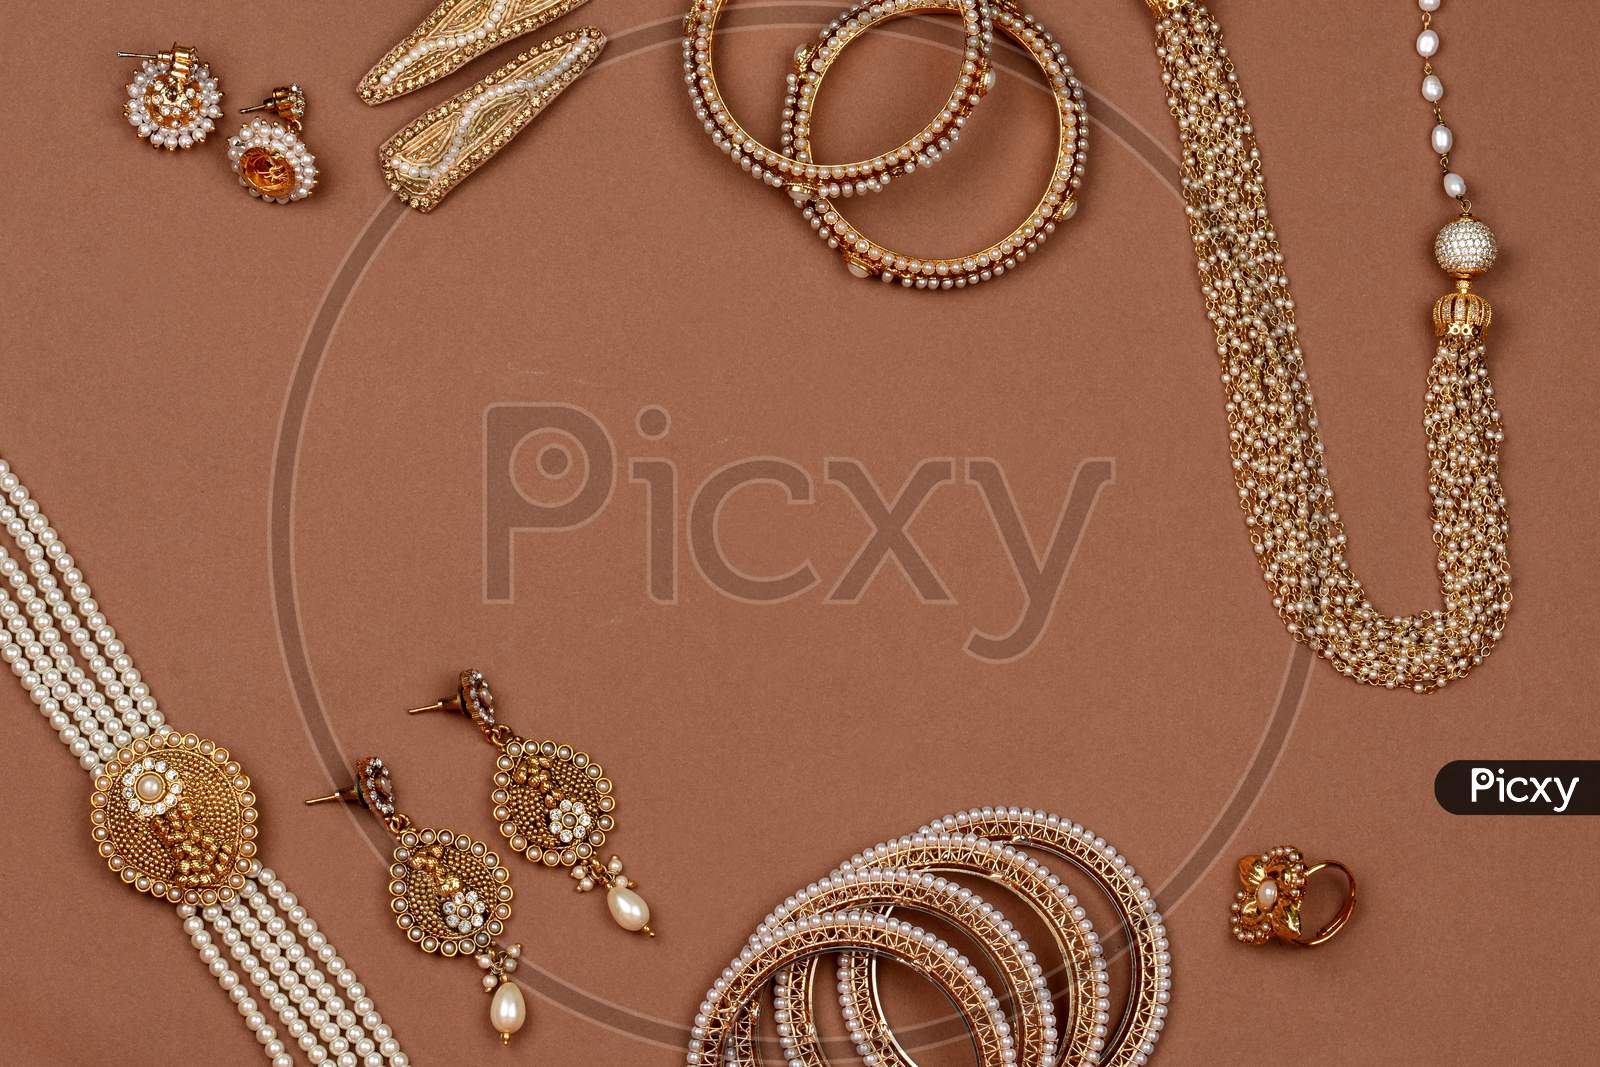 Pearl Jewelry On A Brown Background,Golden Scarf, Pearl Bracelet,Pearl Hair Clip,Pearl Necklace Pearl Earrings,Finger Ring.Fashion And Design Of Jewelry. Indian Traditional Jewellery,Jewelry Backgrond